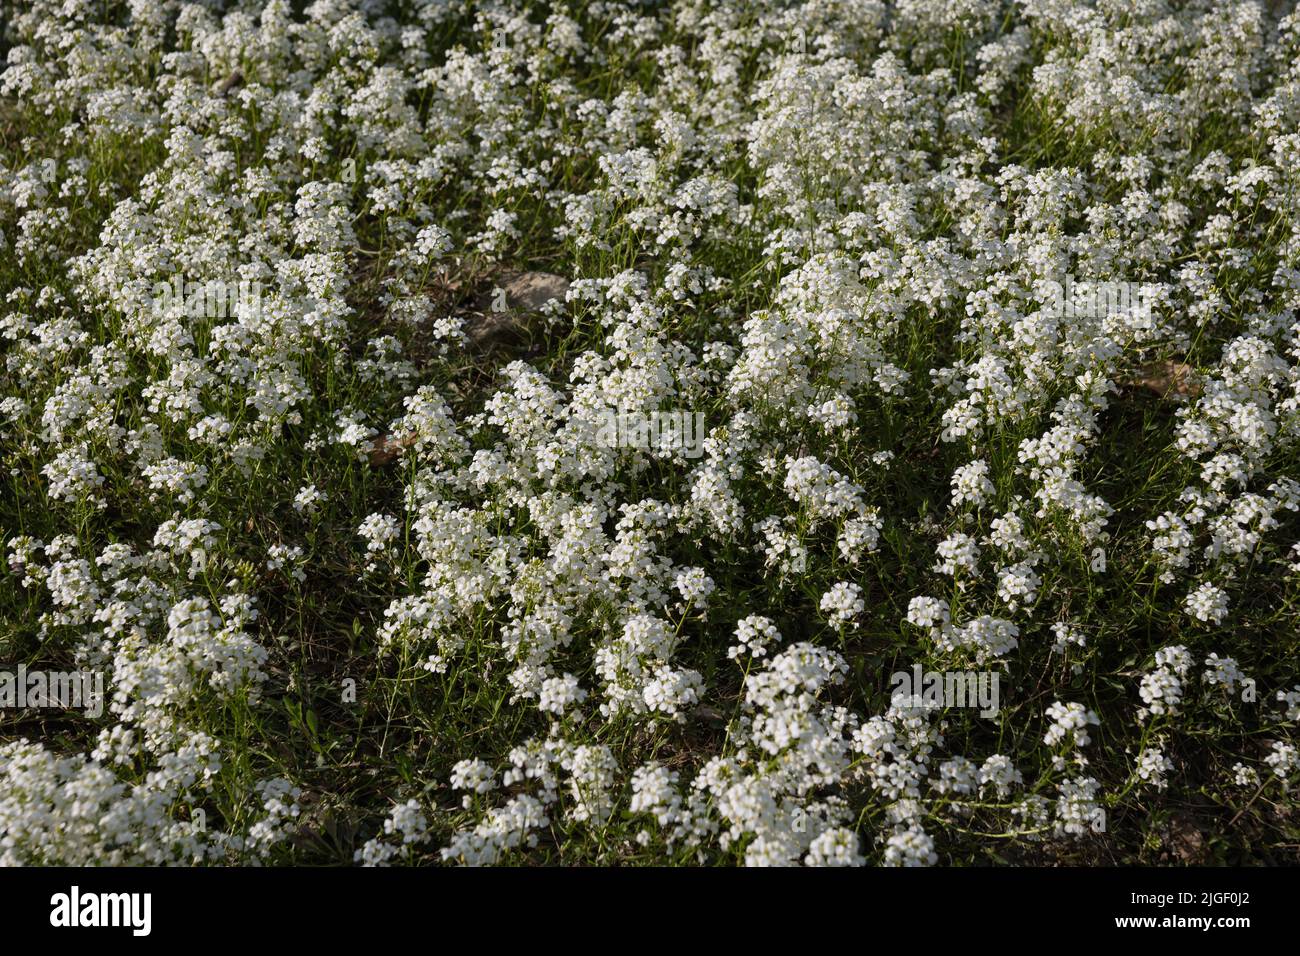 Flower field of Iberis sempervirens, the evergreen candytuft or perennial candytuft blooming flowers, plant in the family Brassicaceae, native to sout Stock Photo